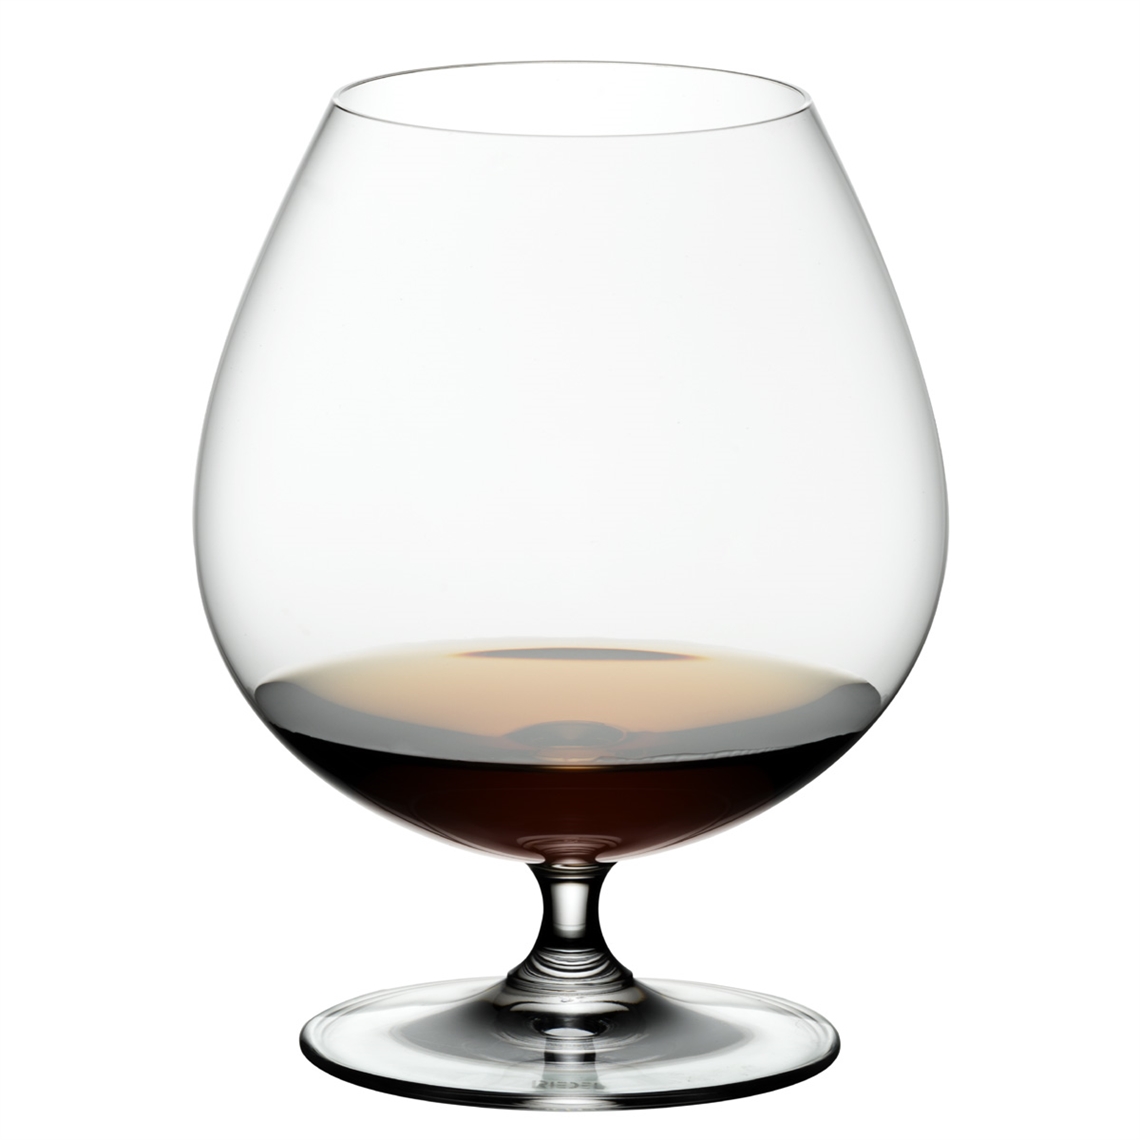 View more prosecco wine glasses from our Spirit Glasses range